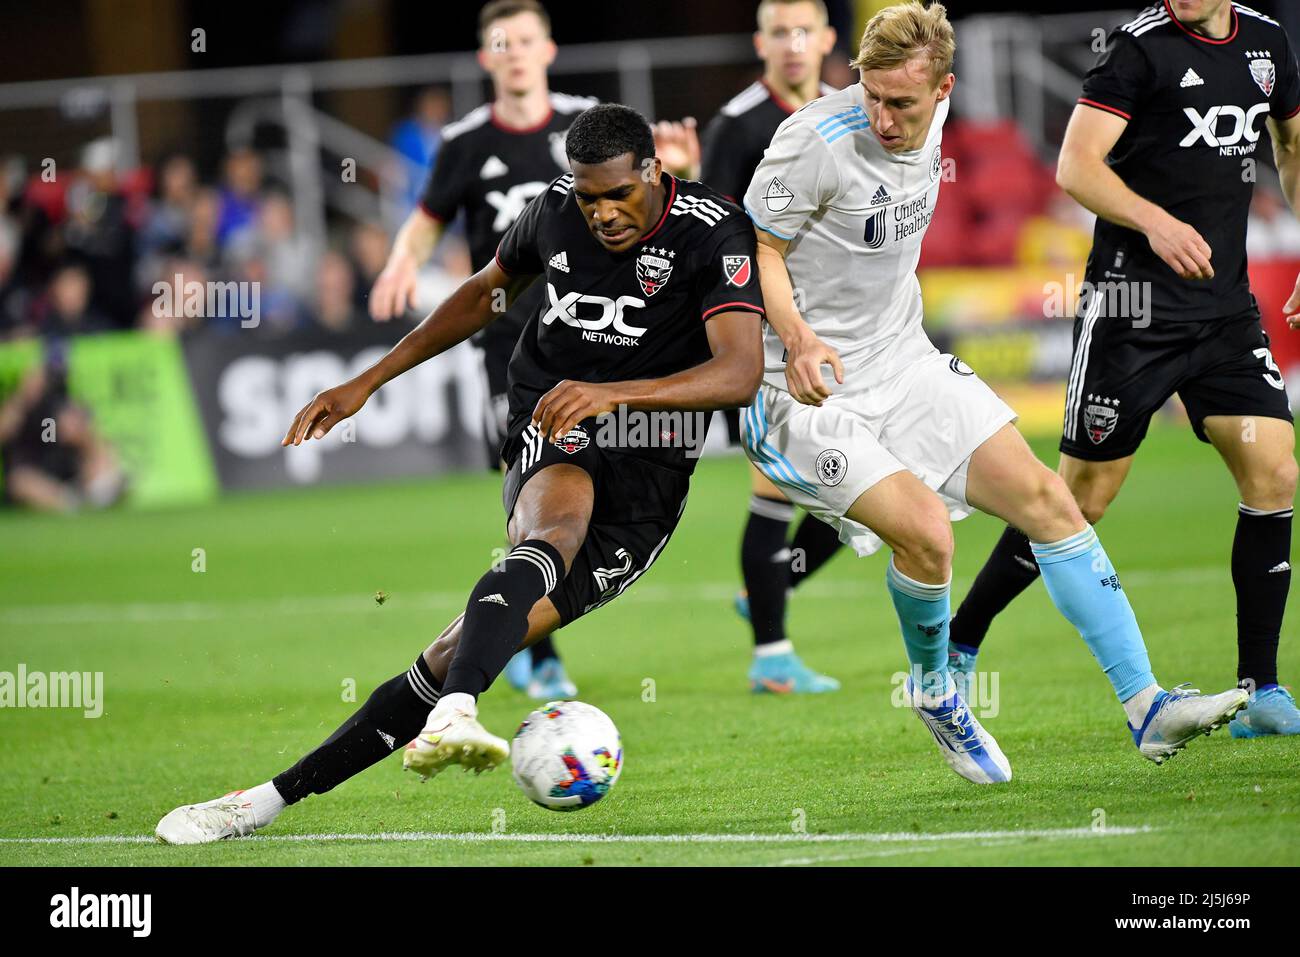 WASHINGTON, DC - APRIL 23: DC United defender Donovan Pines (23) clears a ball away from New England Revolution forward Adam Buksa (9) during the New England Revolution versus D.C. United Major League Soccer (MLS) game on April 23, 2022 at Audi Field in Washington, D.C. (Credit Image: © Randy Litzinger/Icon SMI via ZUMA Press) Stock Photo